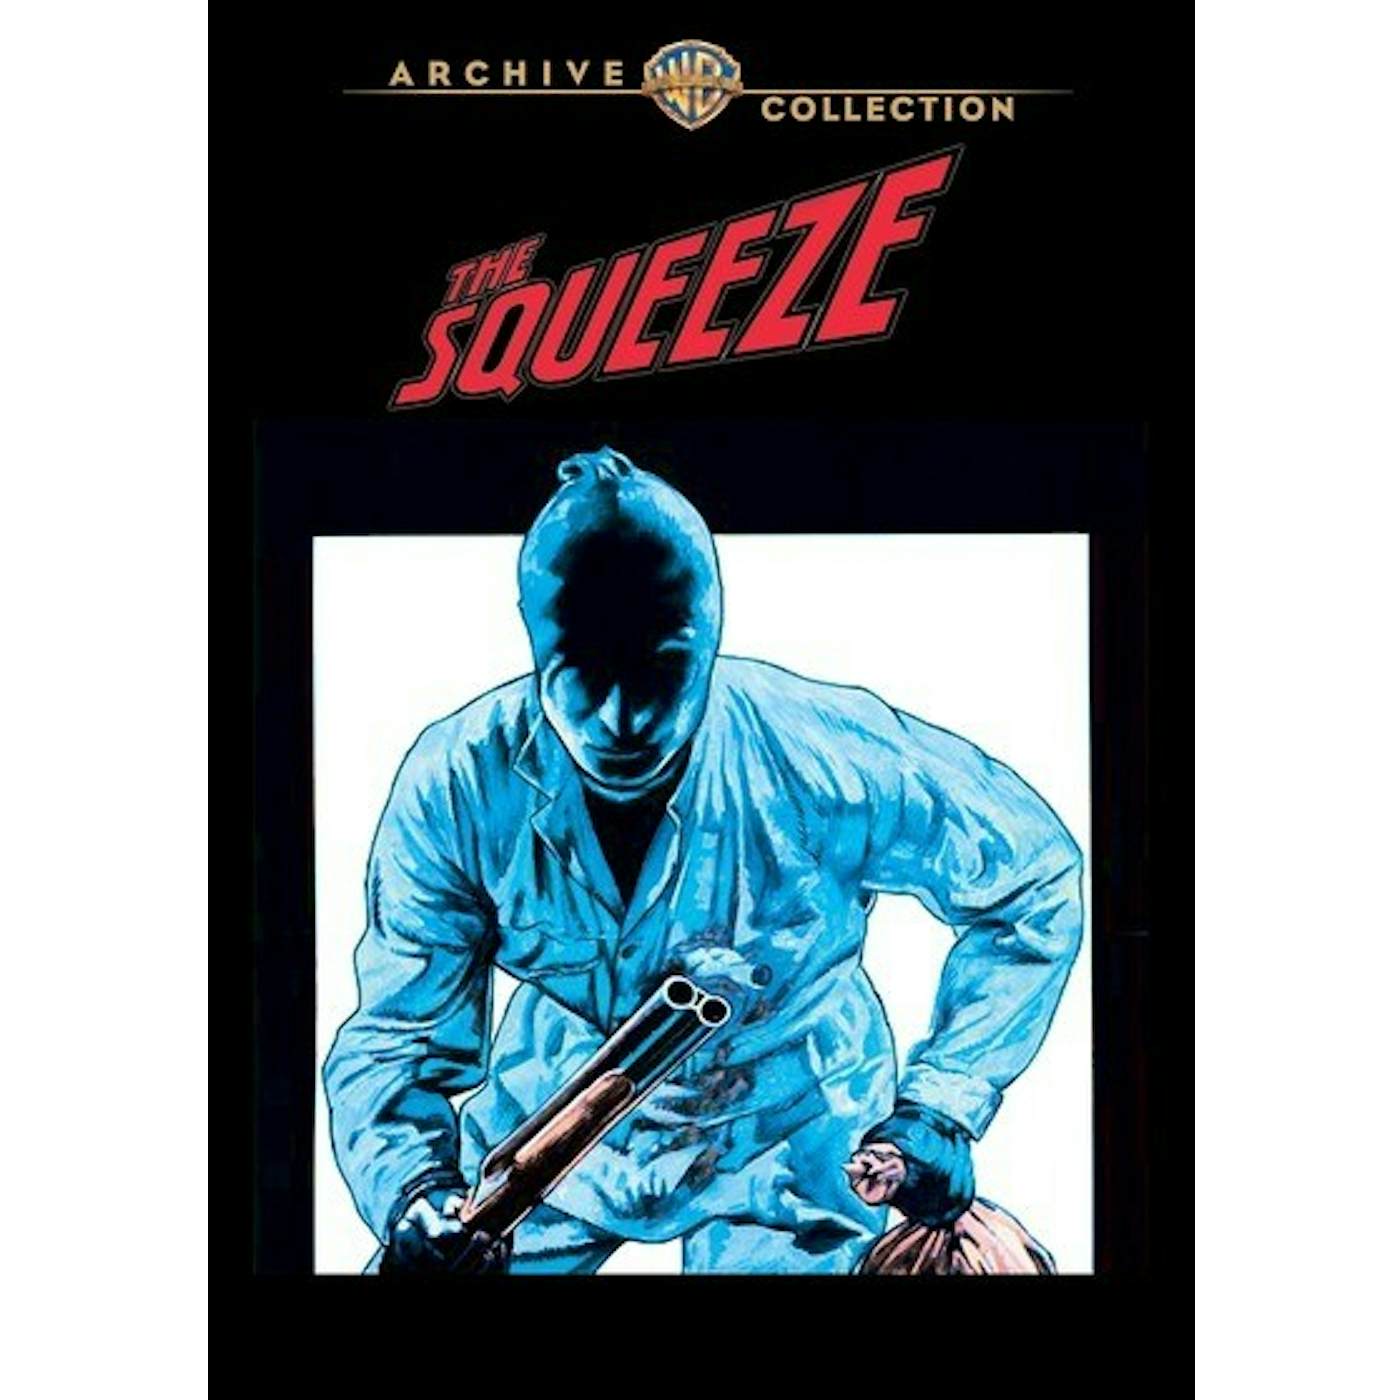 SQUEEZE DVD